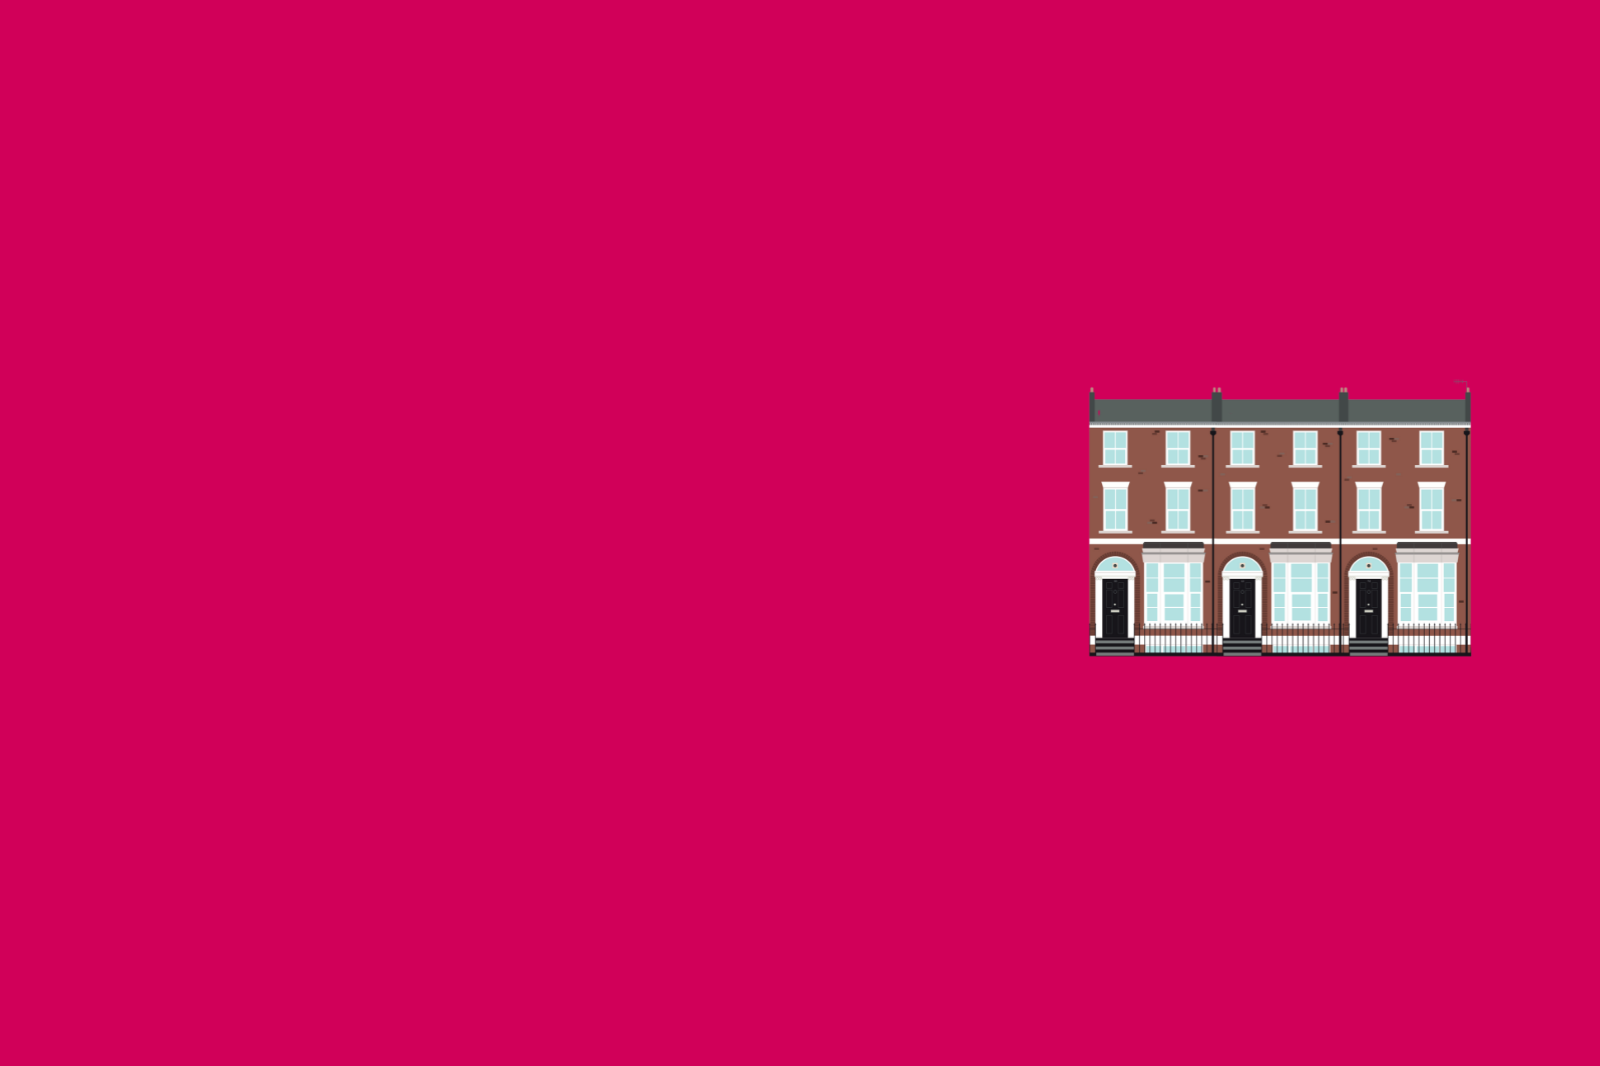 An illustration of a building on a pink background showcasing the concept of 